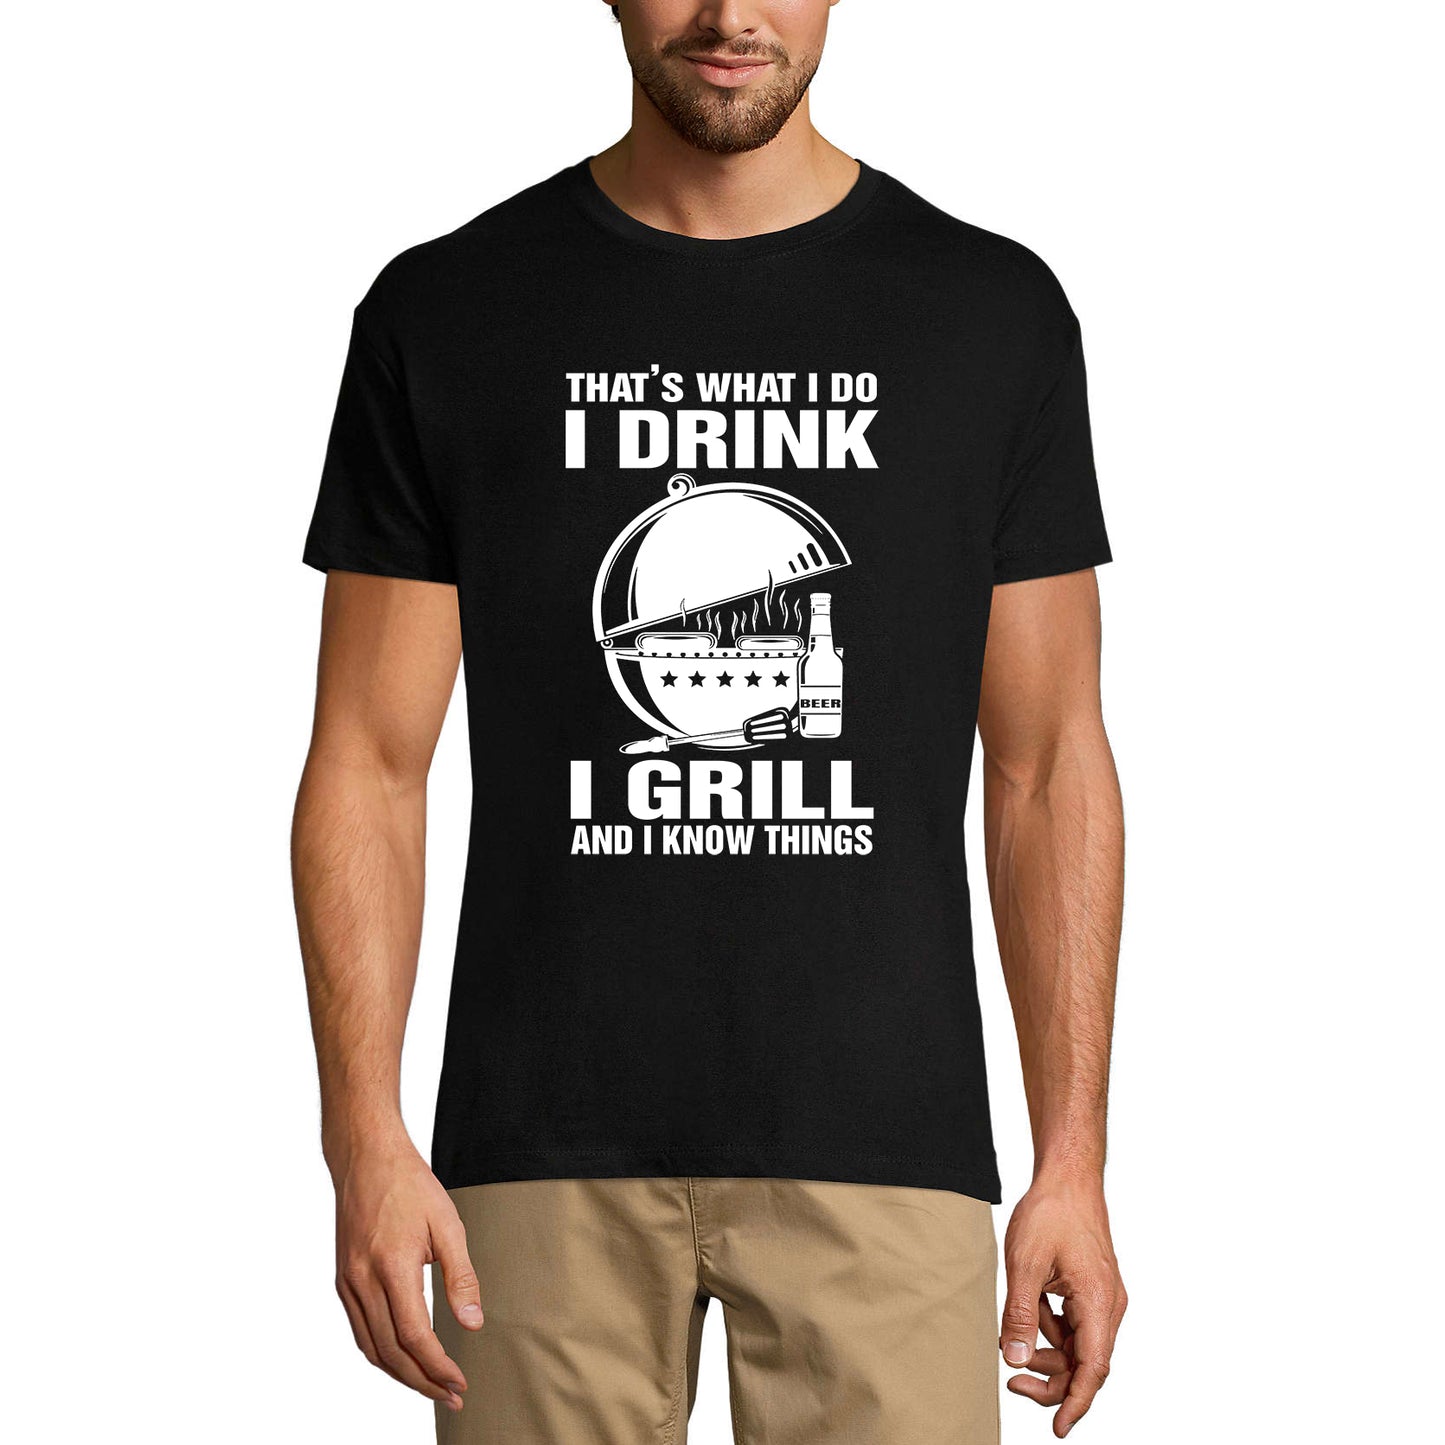 ULTRABASIC Men's T-Shirt That's What I Do I Drink I Grill and I Know Things - Funny Beer Lover Tee Shirt